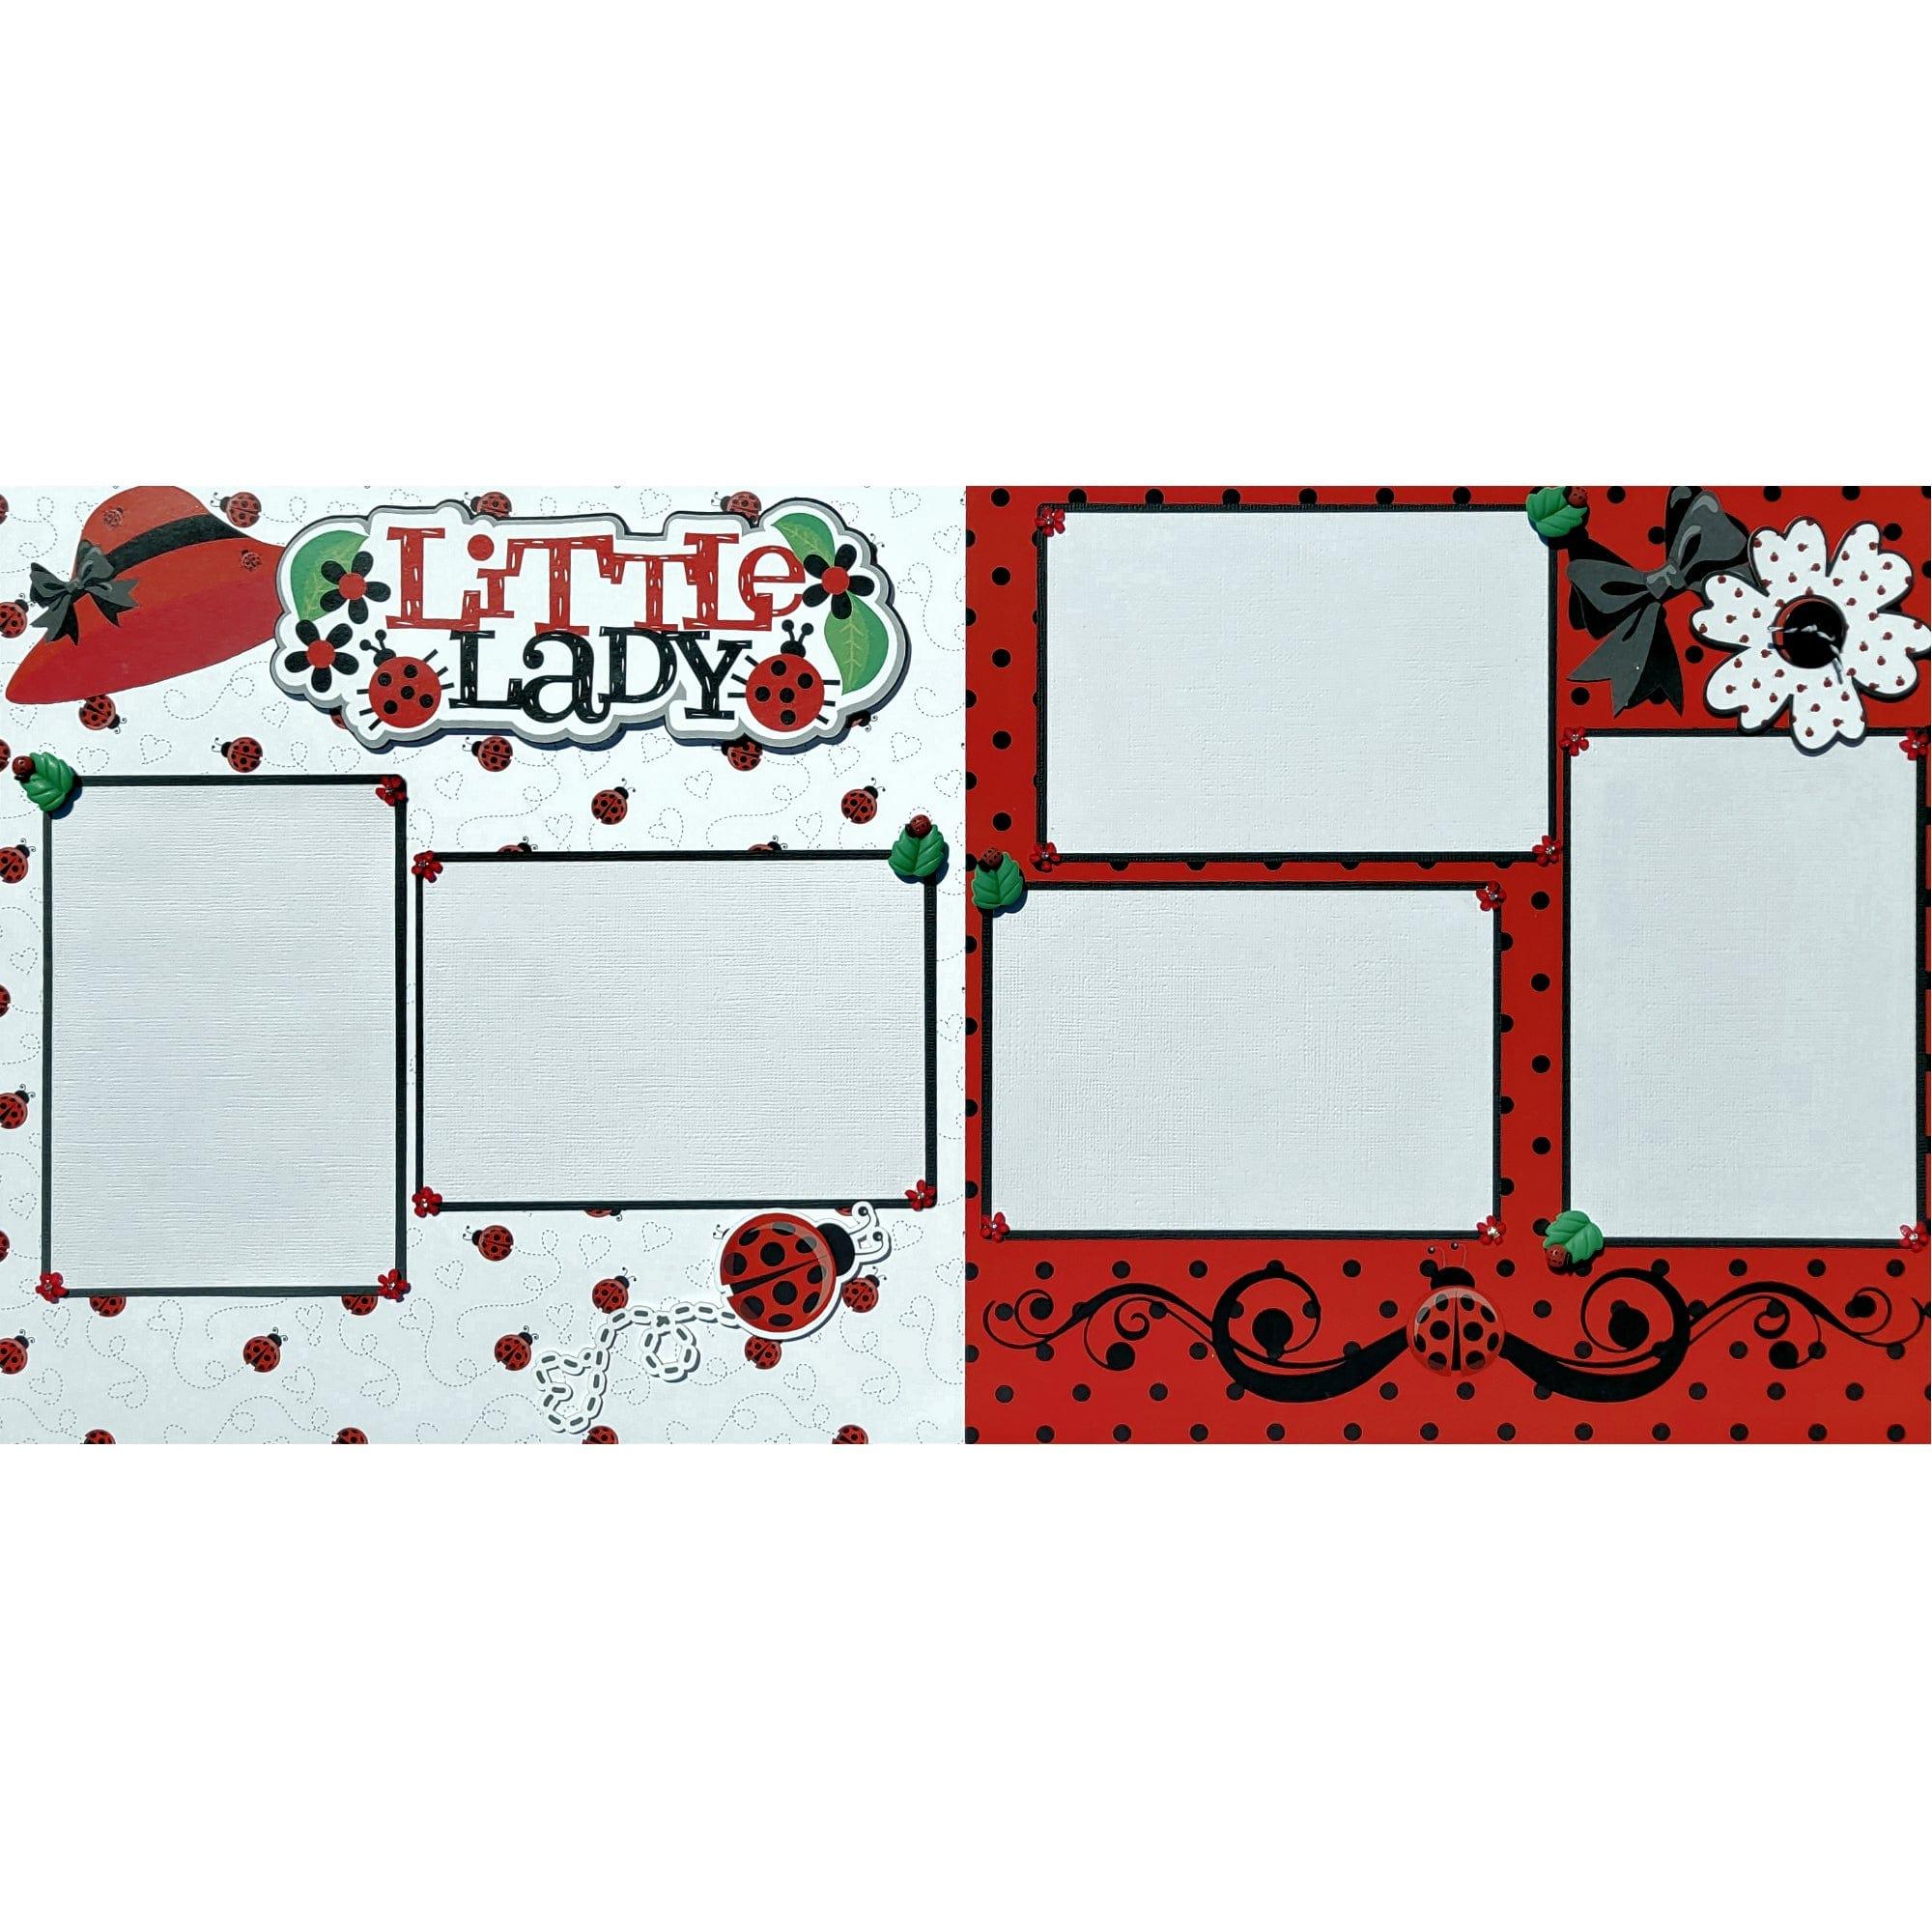 Ladybug Love Little Lady (2) - 12 x 12 Pages, Fully-Assembled & Hand-Crafted 3D Scrapbook Premade by SSC Designs